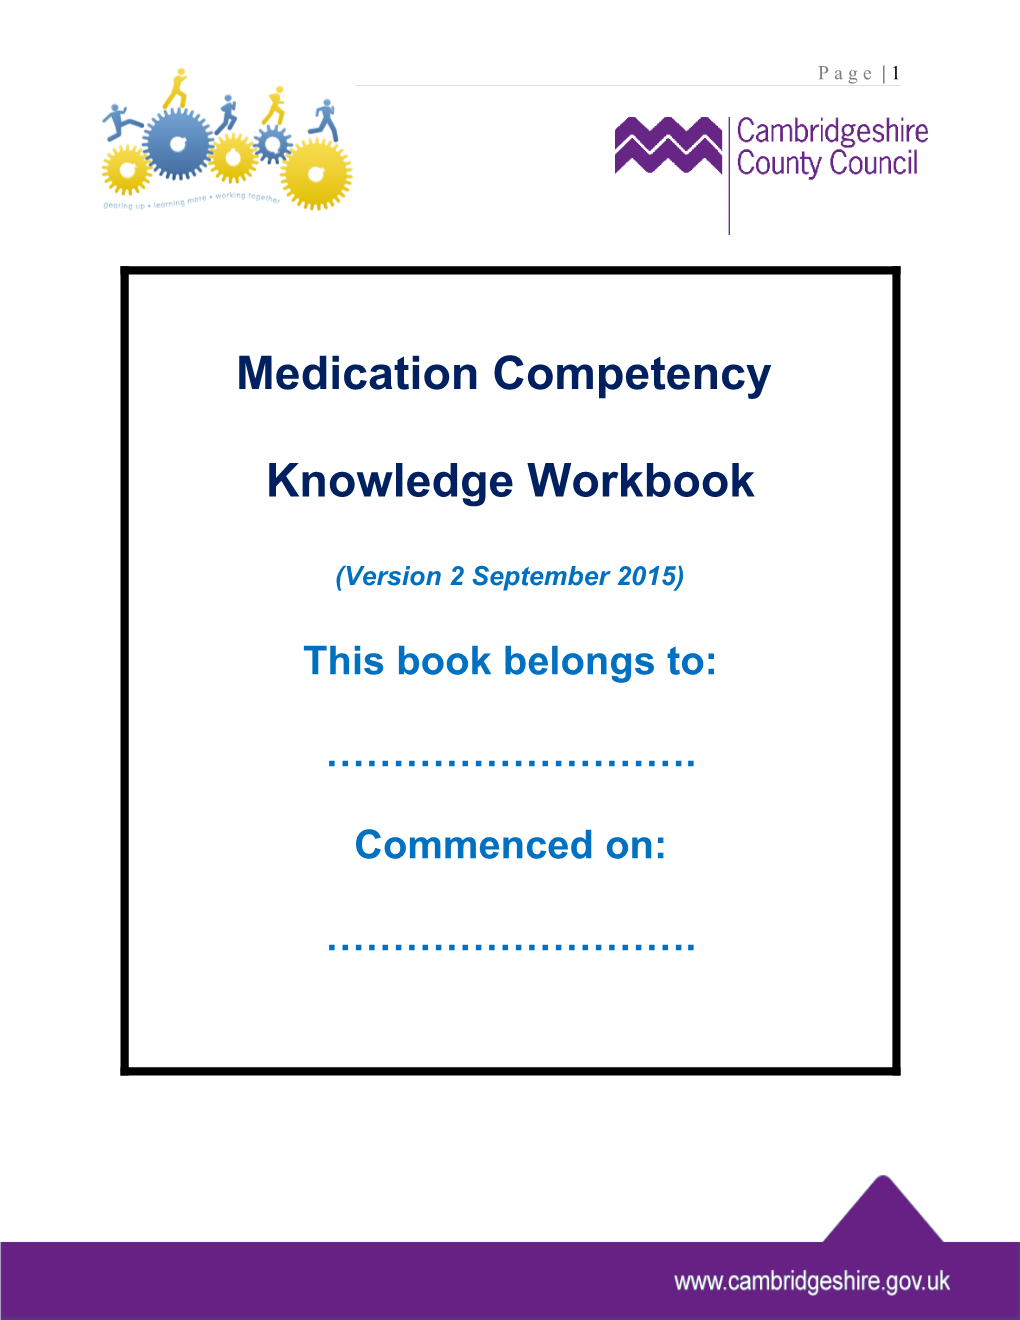 Medication Competency